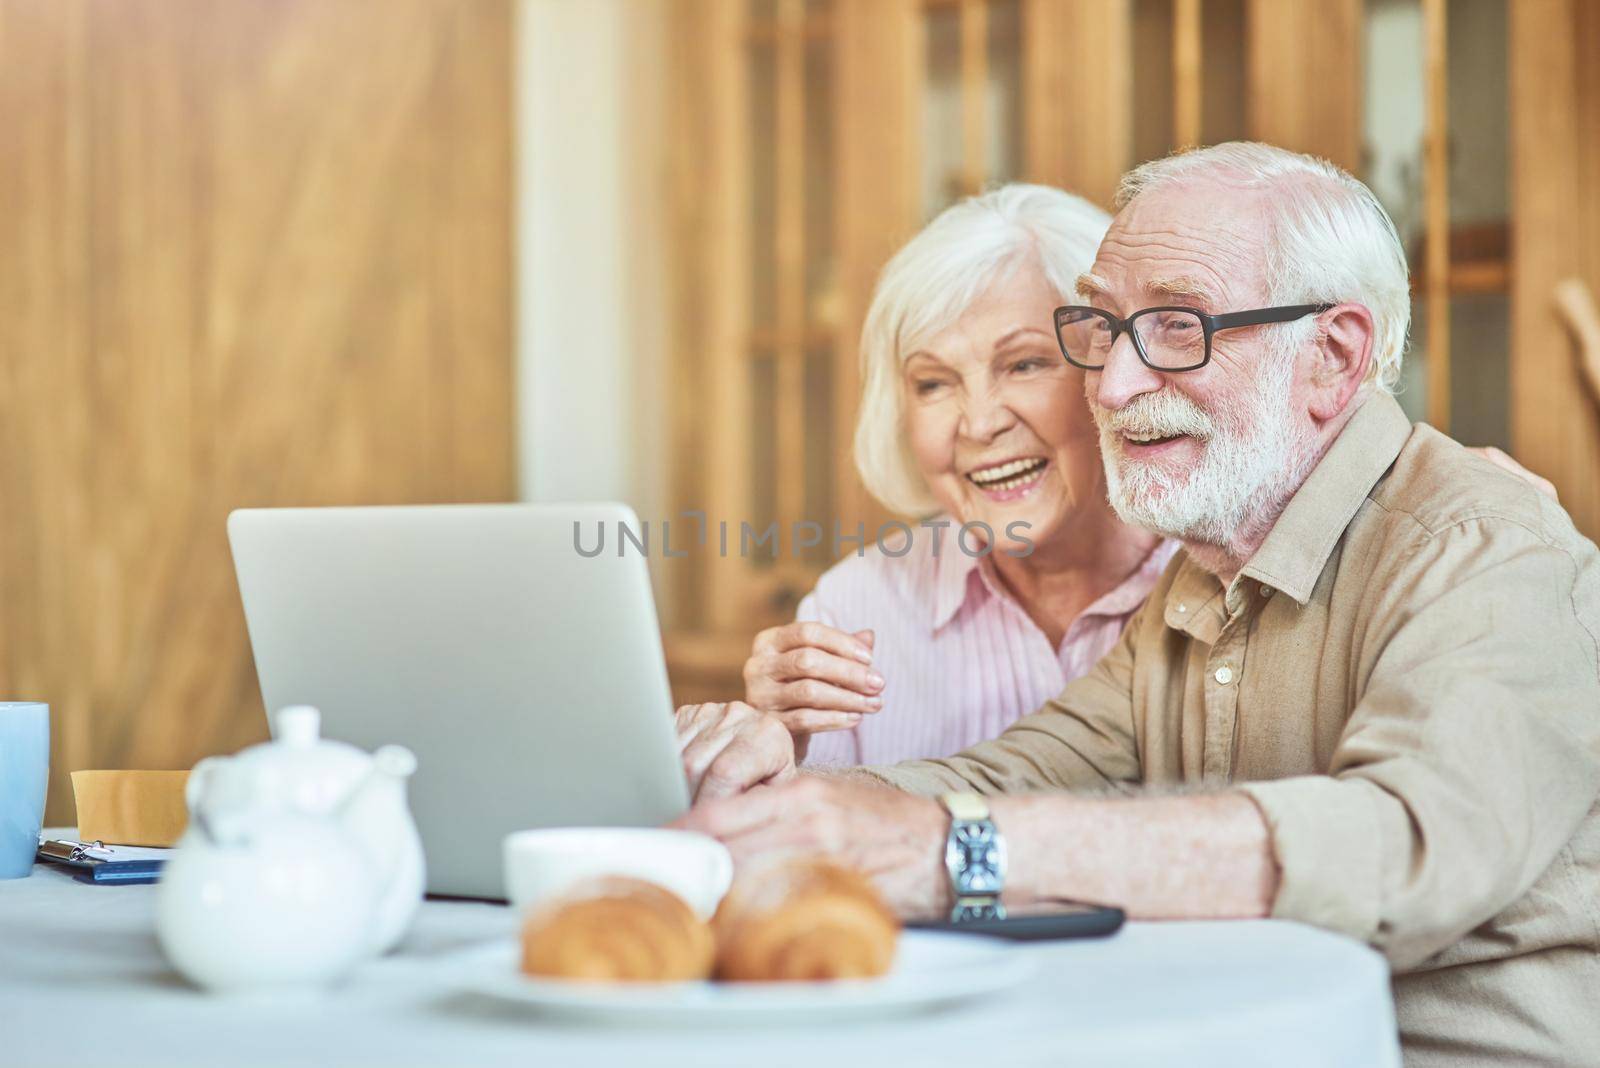 Happy senior man and woman hugging while sitting at the table and looking at laptop screen. Domestic lifestyle concept